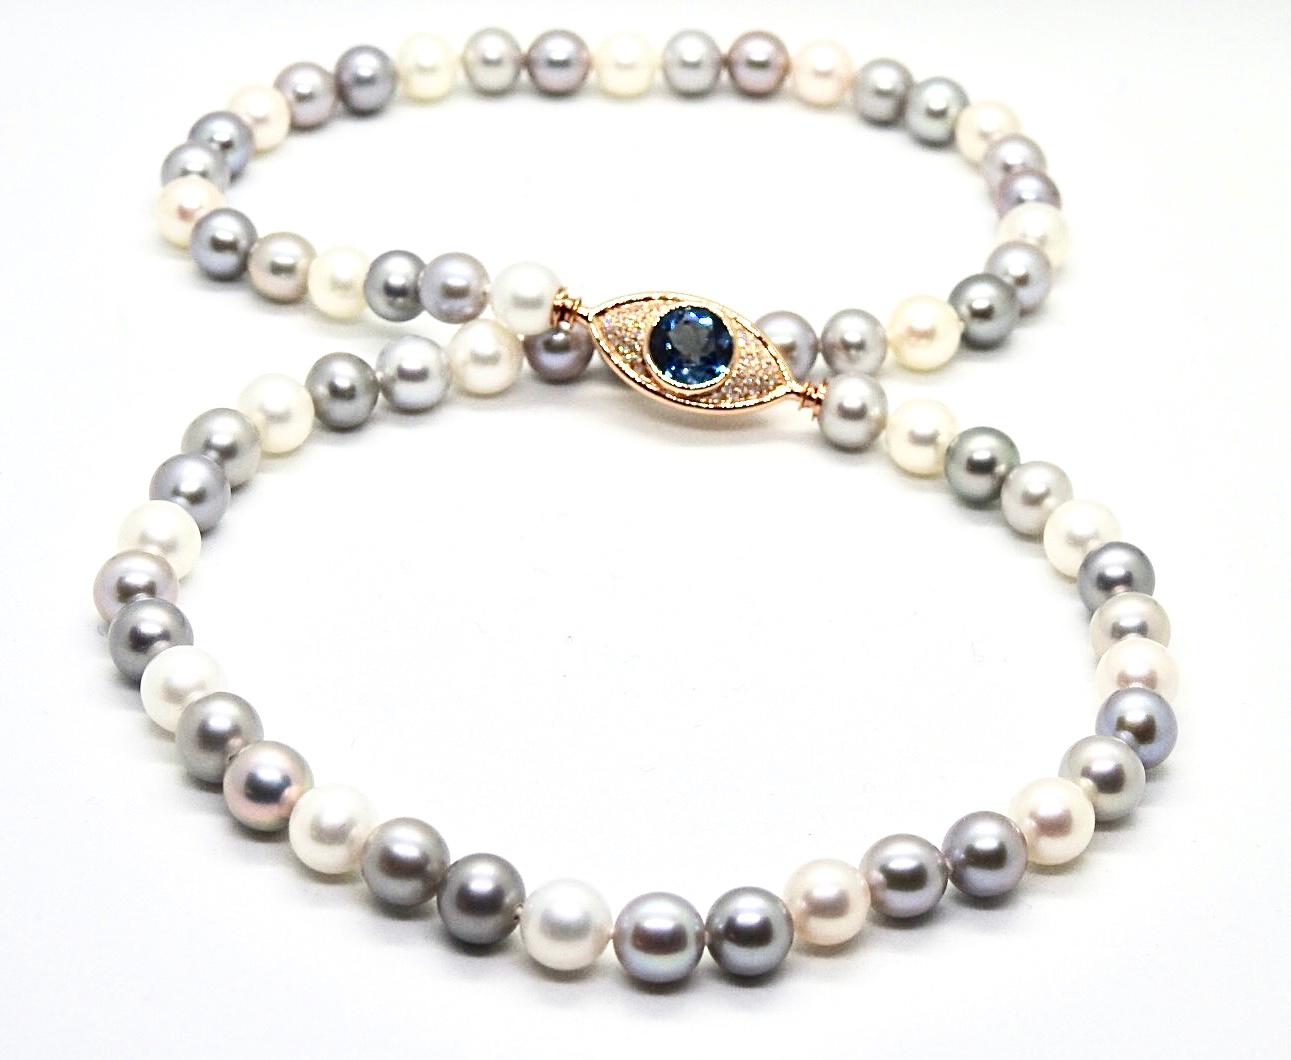 Pearls Necklace with 18 Karat Gold, Diamonds and Swiss Blue Topaz Eye Clasp For Sale 2